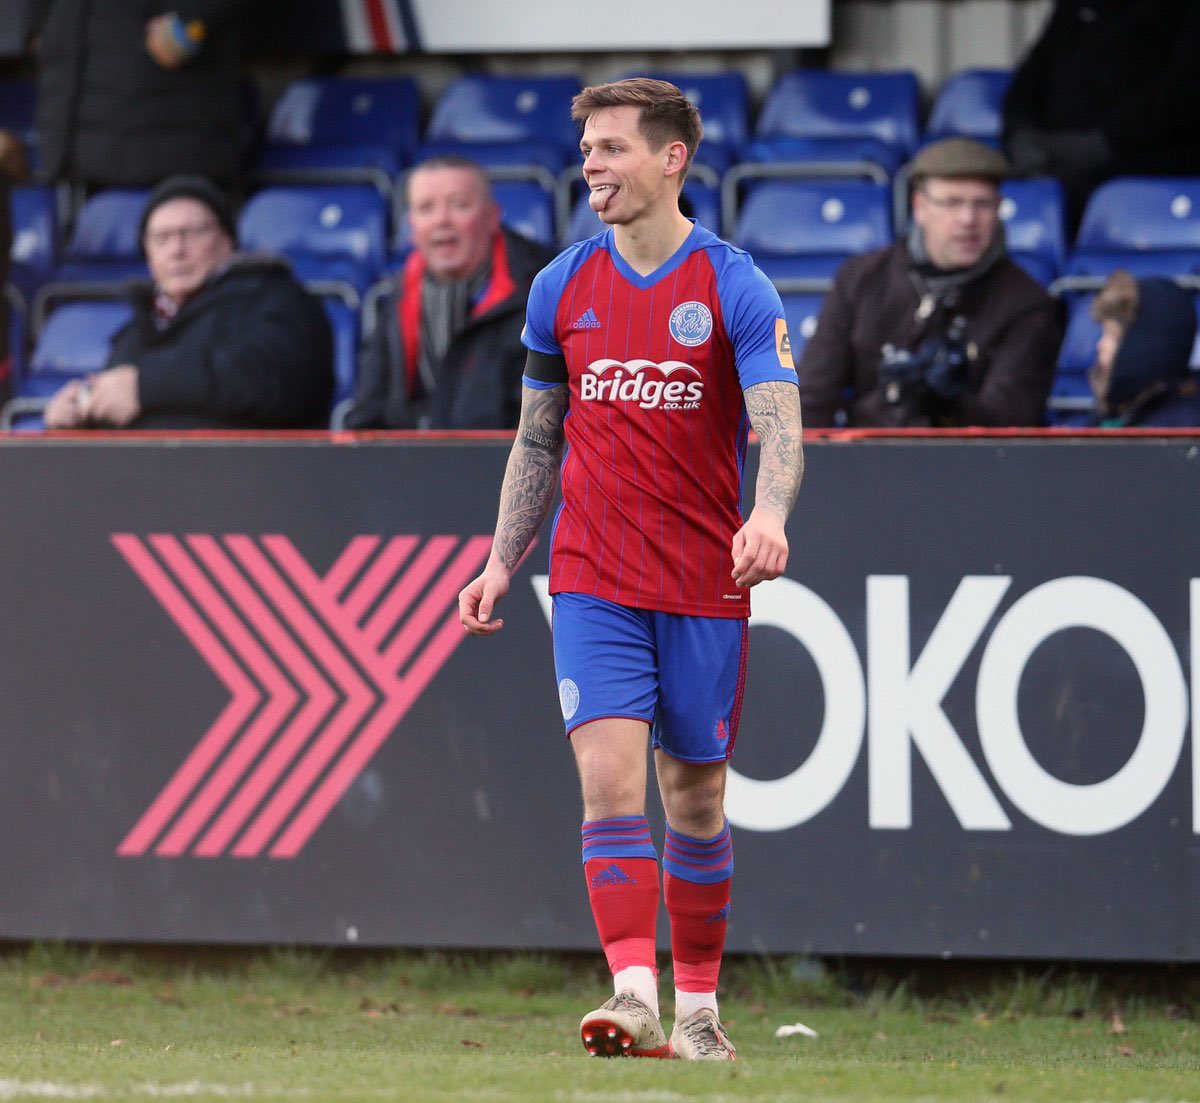 10.  @CraigTanner27 Joined from: AcademyReading games: 5Reading goals: 1Current team: Aldershot TownJoined Motherwell on a free, but suffered an horrific injury in a “freak incident” in training. 2 years later, signed for Aldershot where he has 4 goals in 12 games.